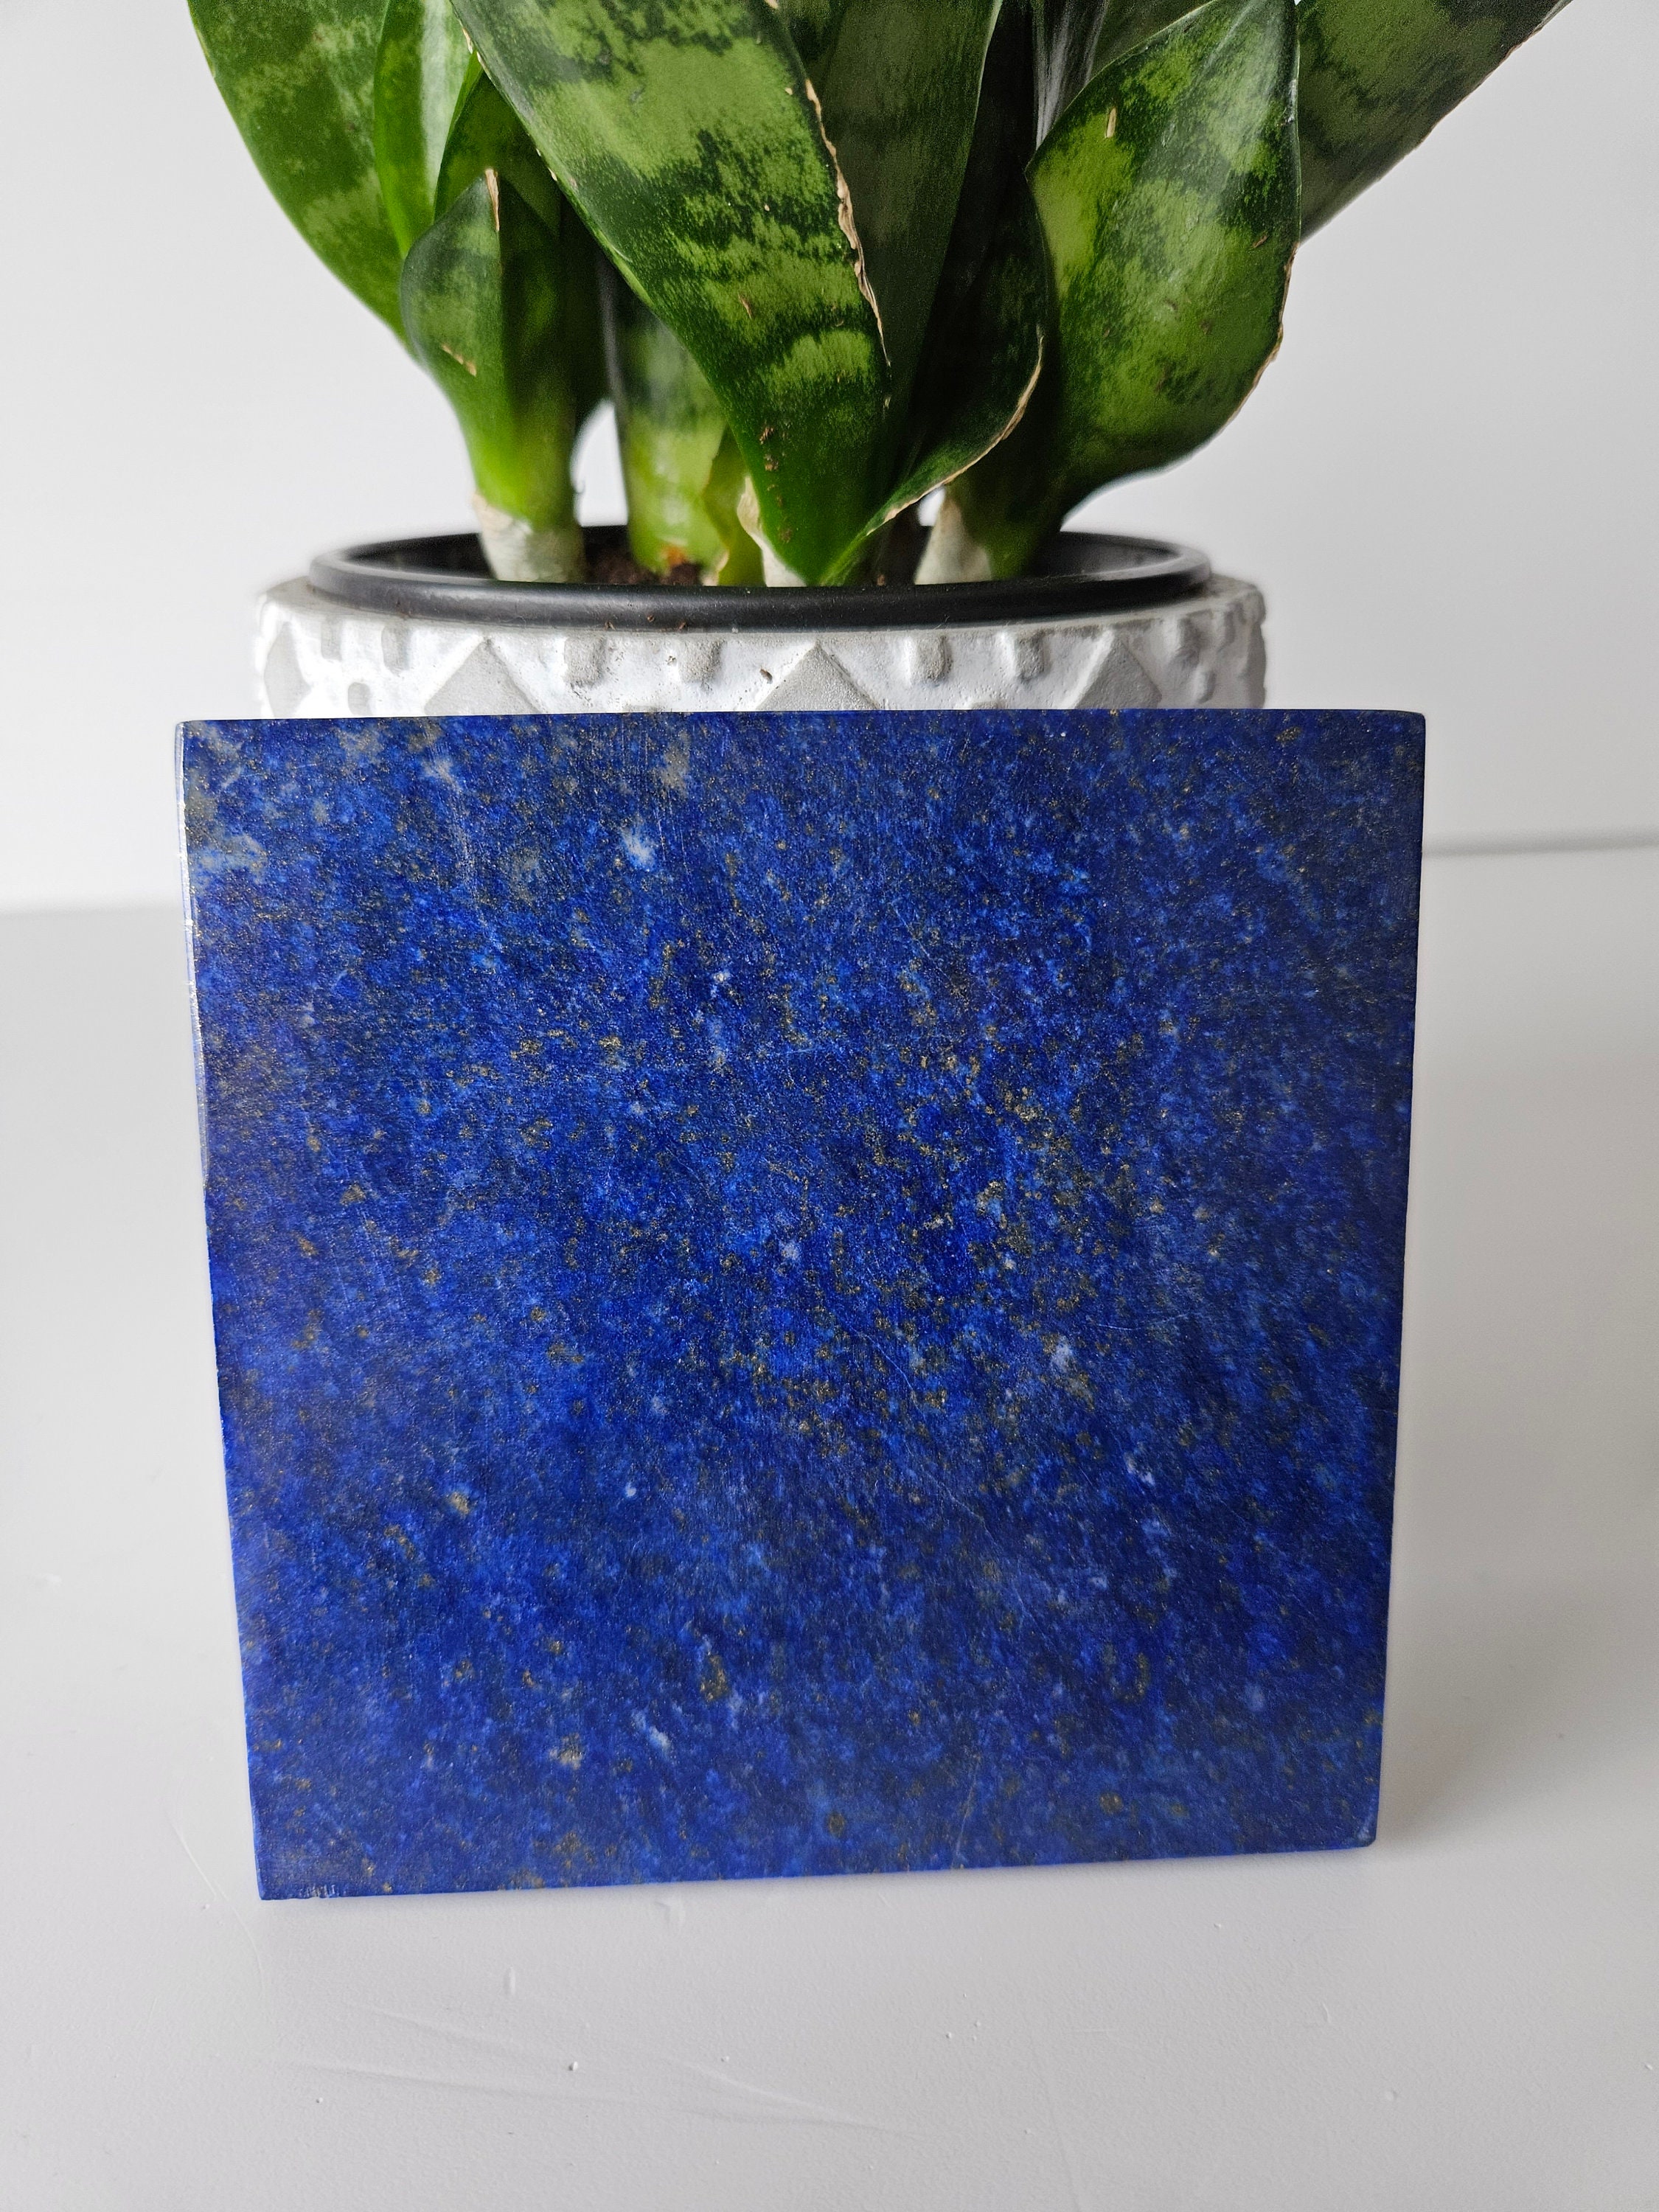 10x10 cm Stone Sided Tile | A+++ Lapis Lazuli, Desk Accessories, Pyrite slab, Femininity, Metaphysical stone, Crystal Gifts, Grounding